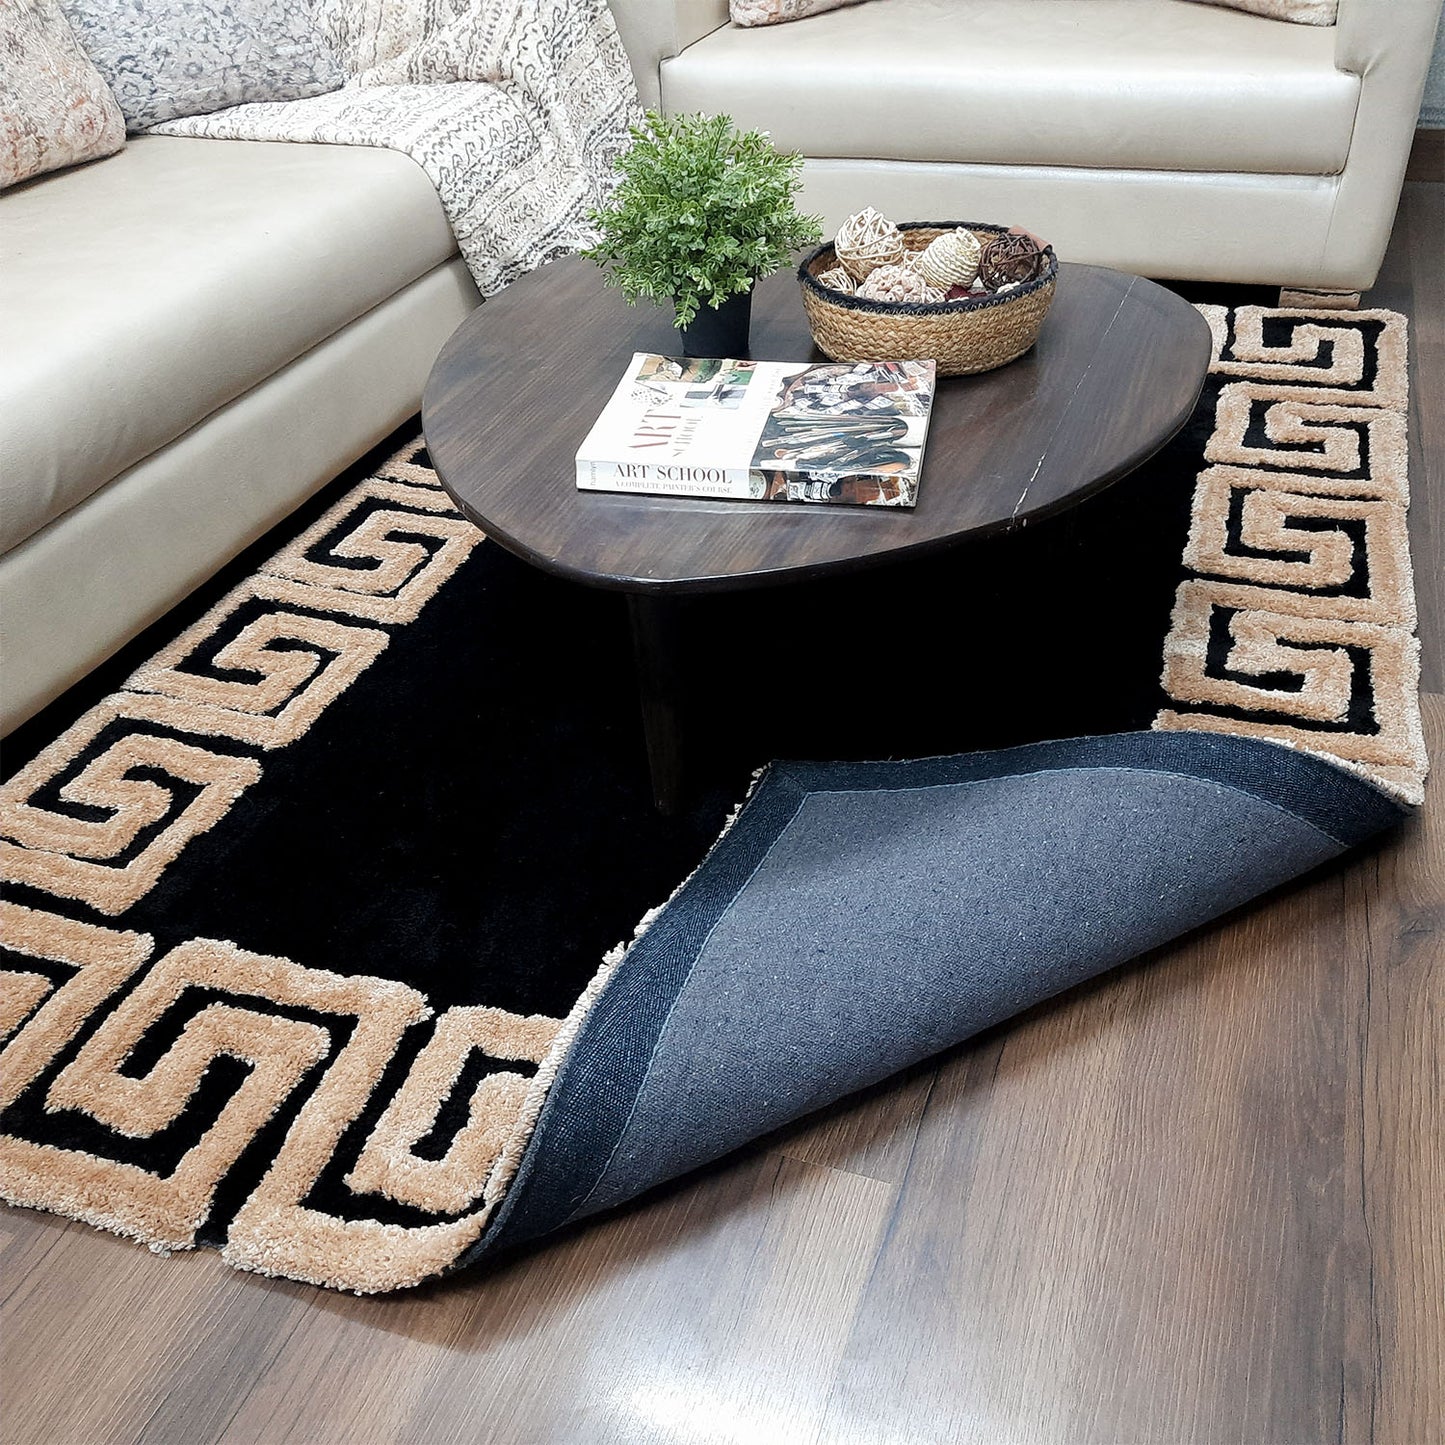 Avioni Atlas Collection- Micro Black with 3D Beige Designer Border -Different Sizes Shaggy Fluffy Rugs and Carpet for Living Room